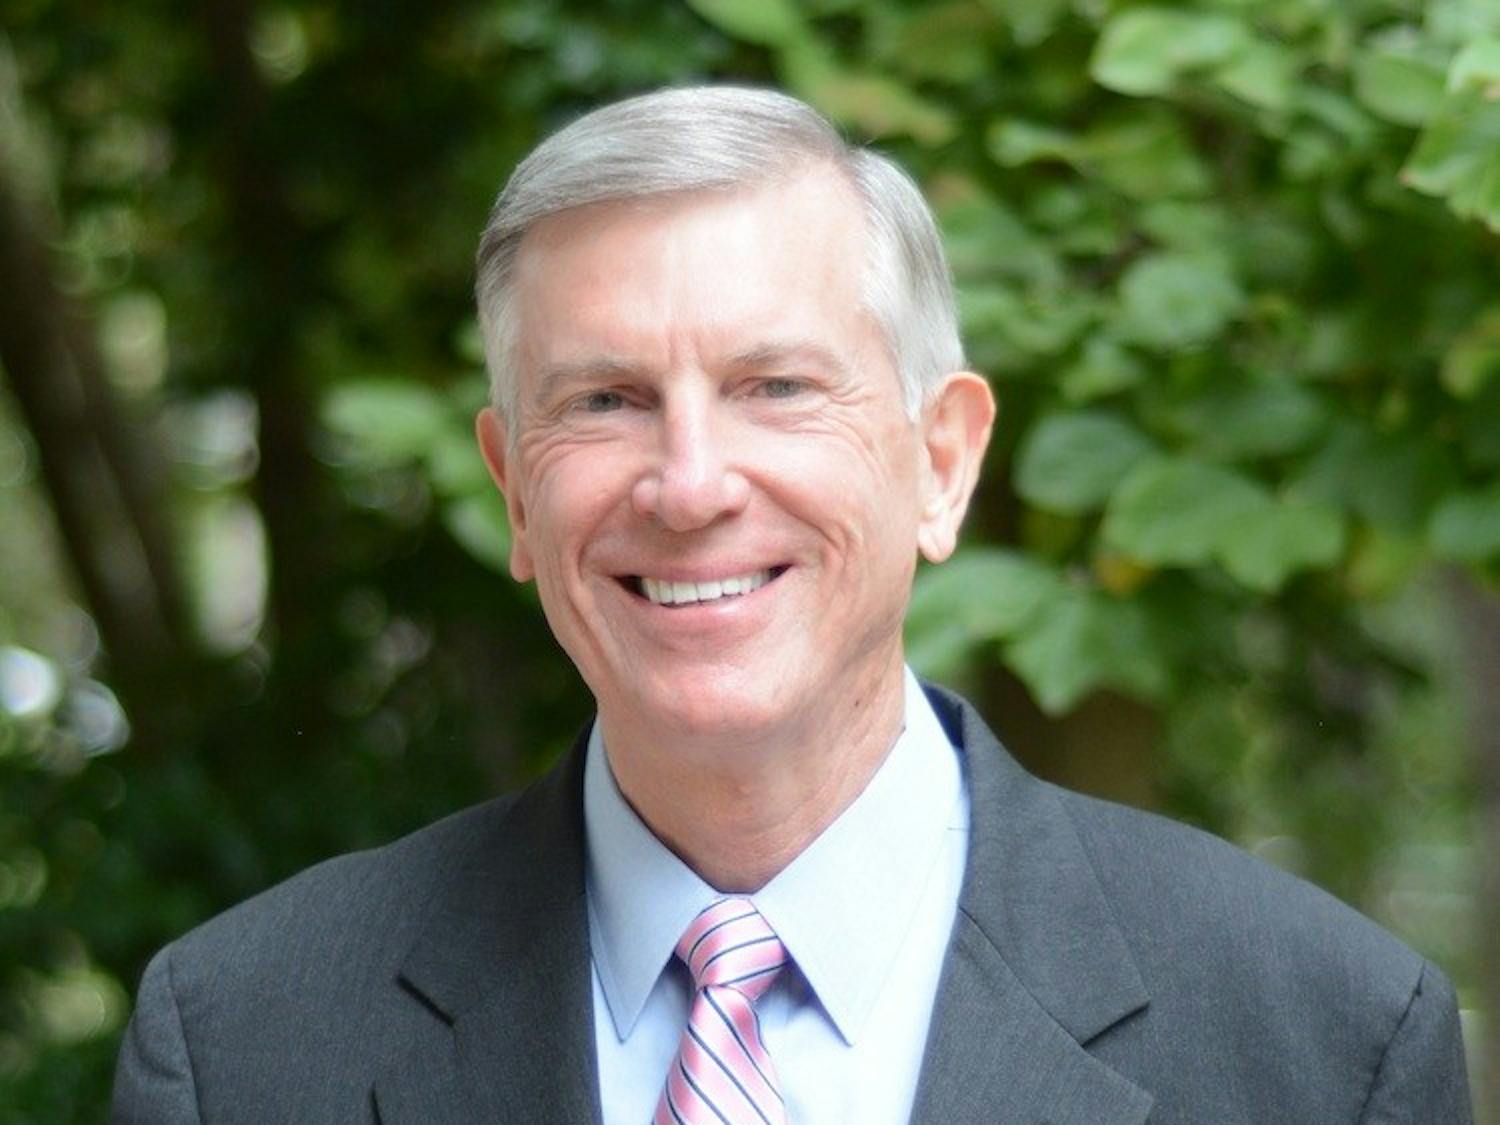 Tom Ross, President of the UNC system.